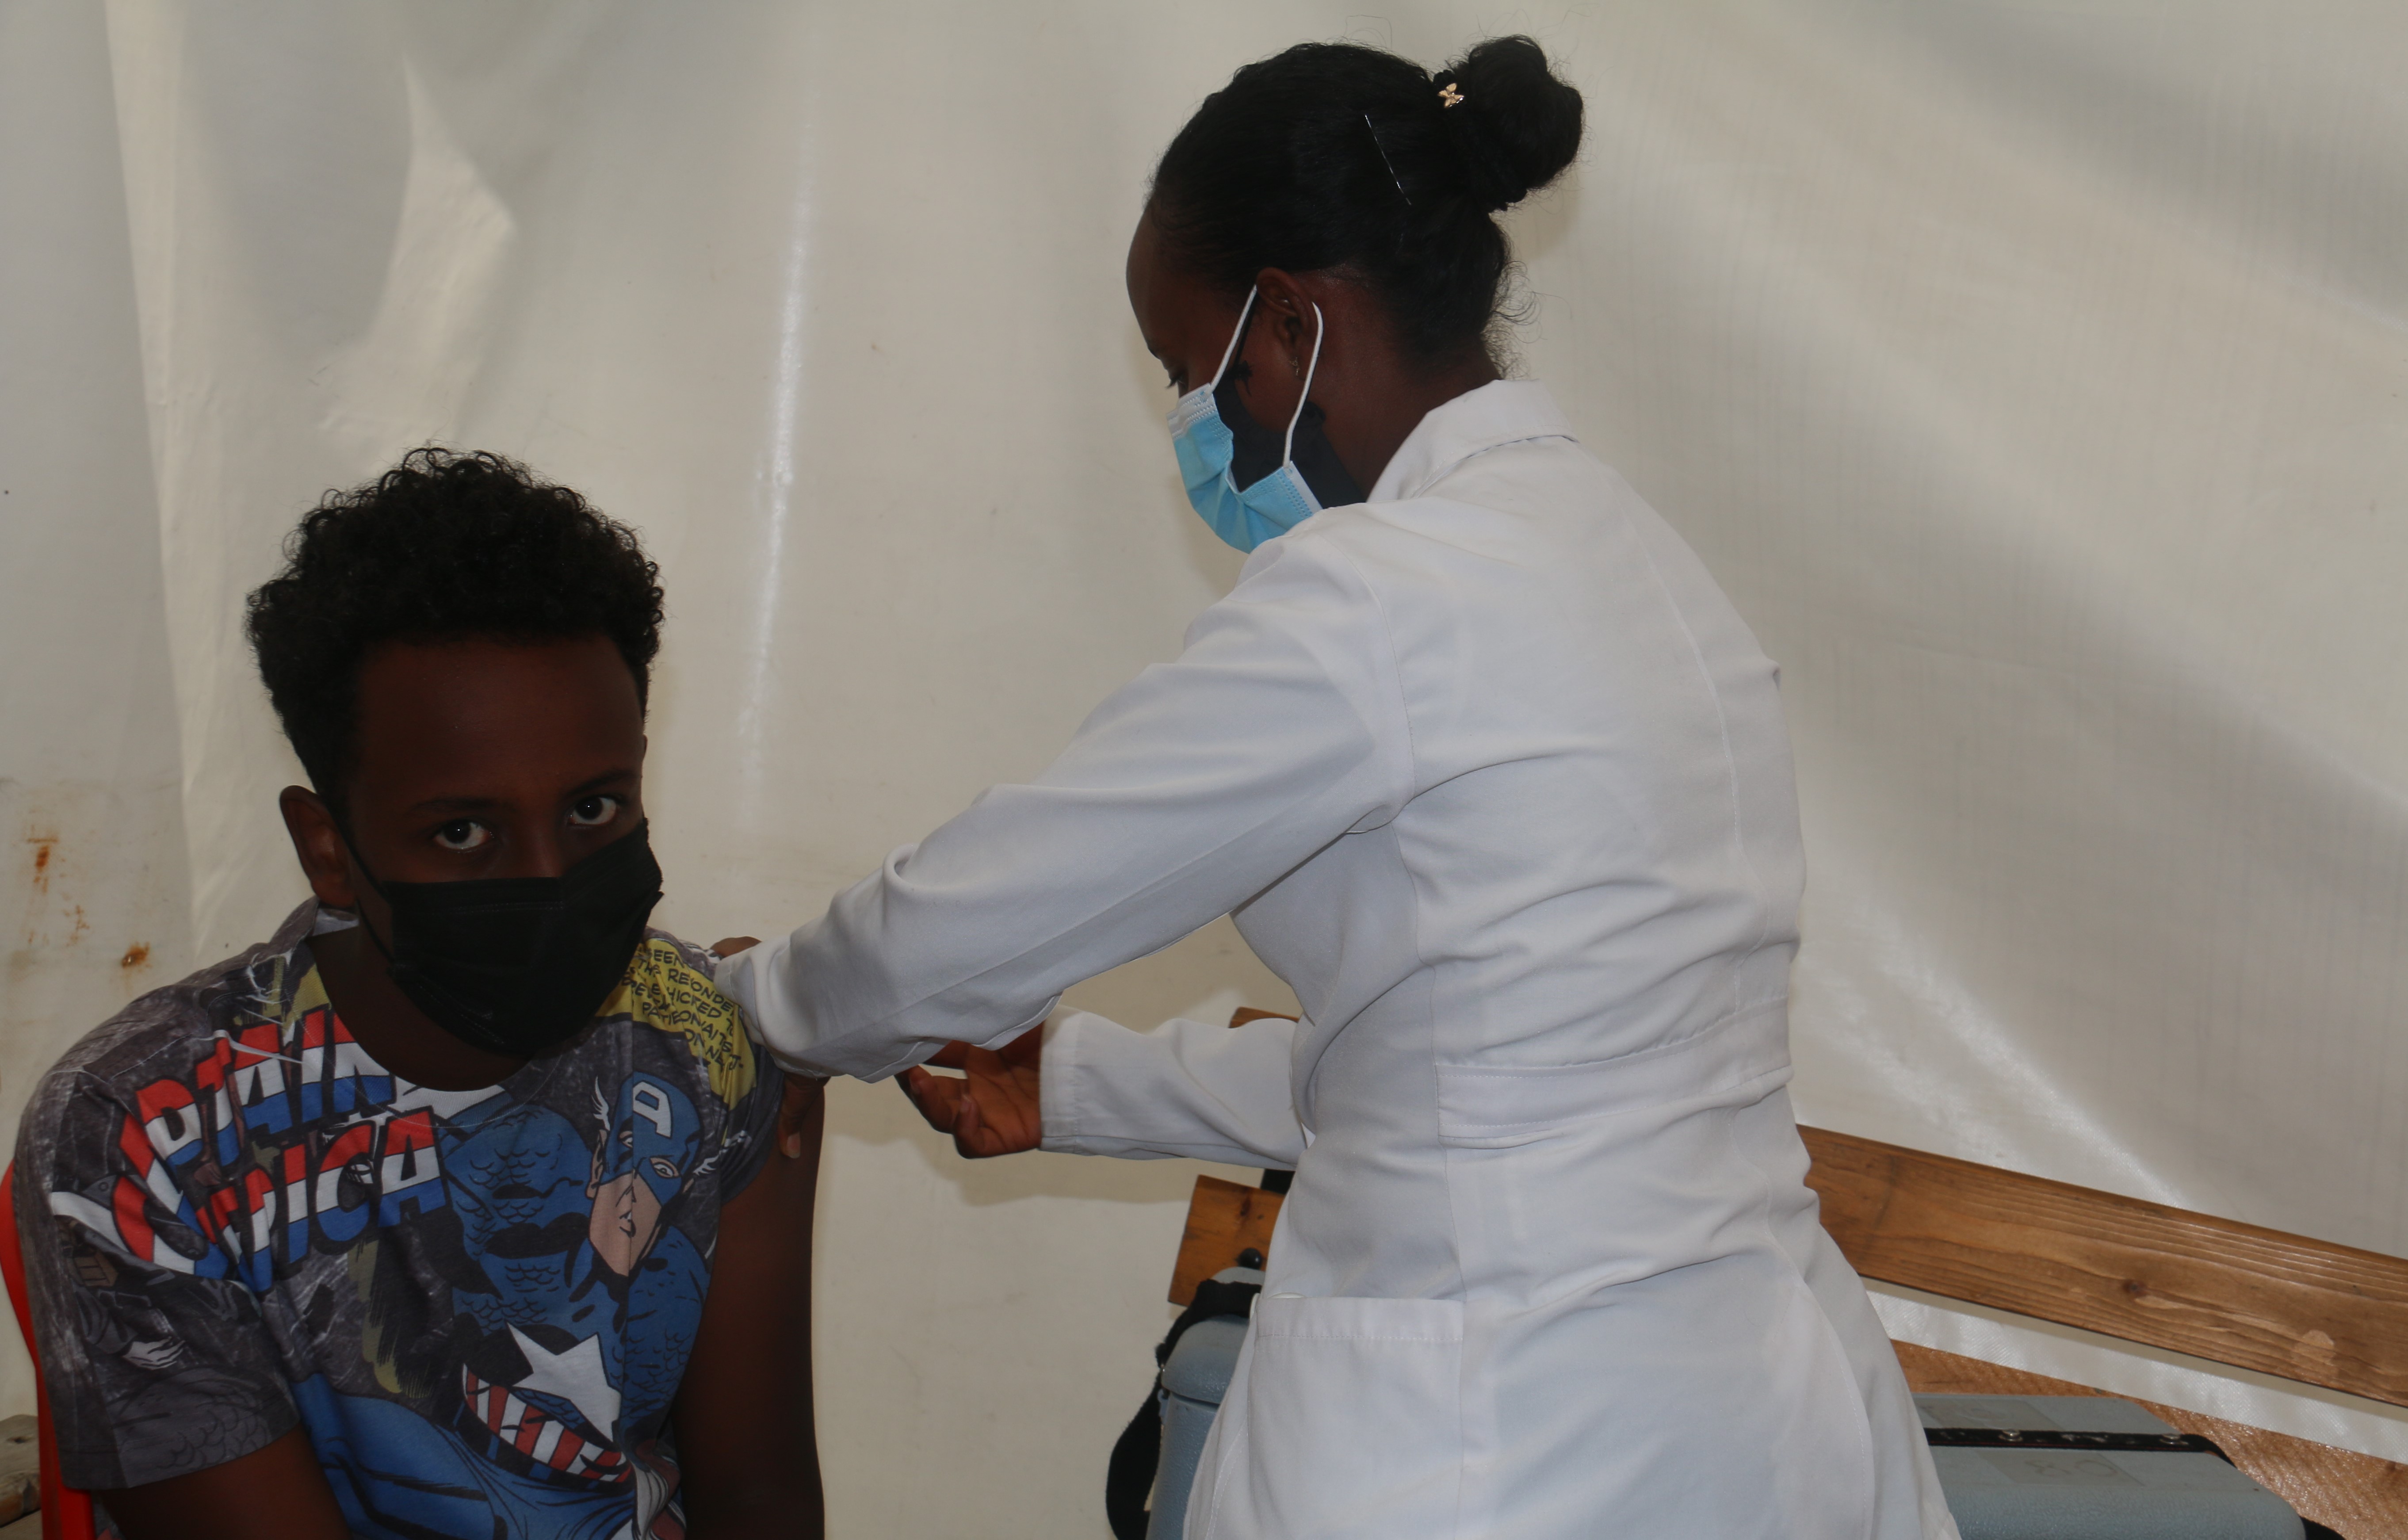 Ethiopia launches a COVID-19 vaccination campaign targeting the 12 years and above population